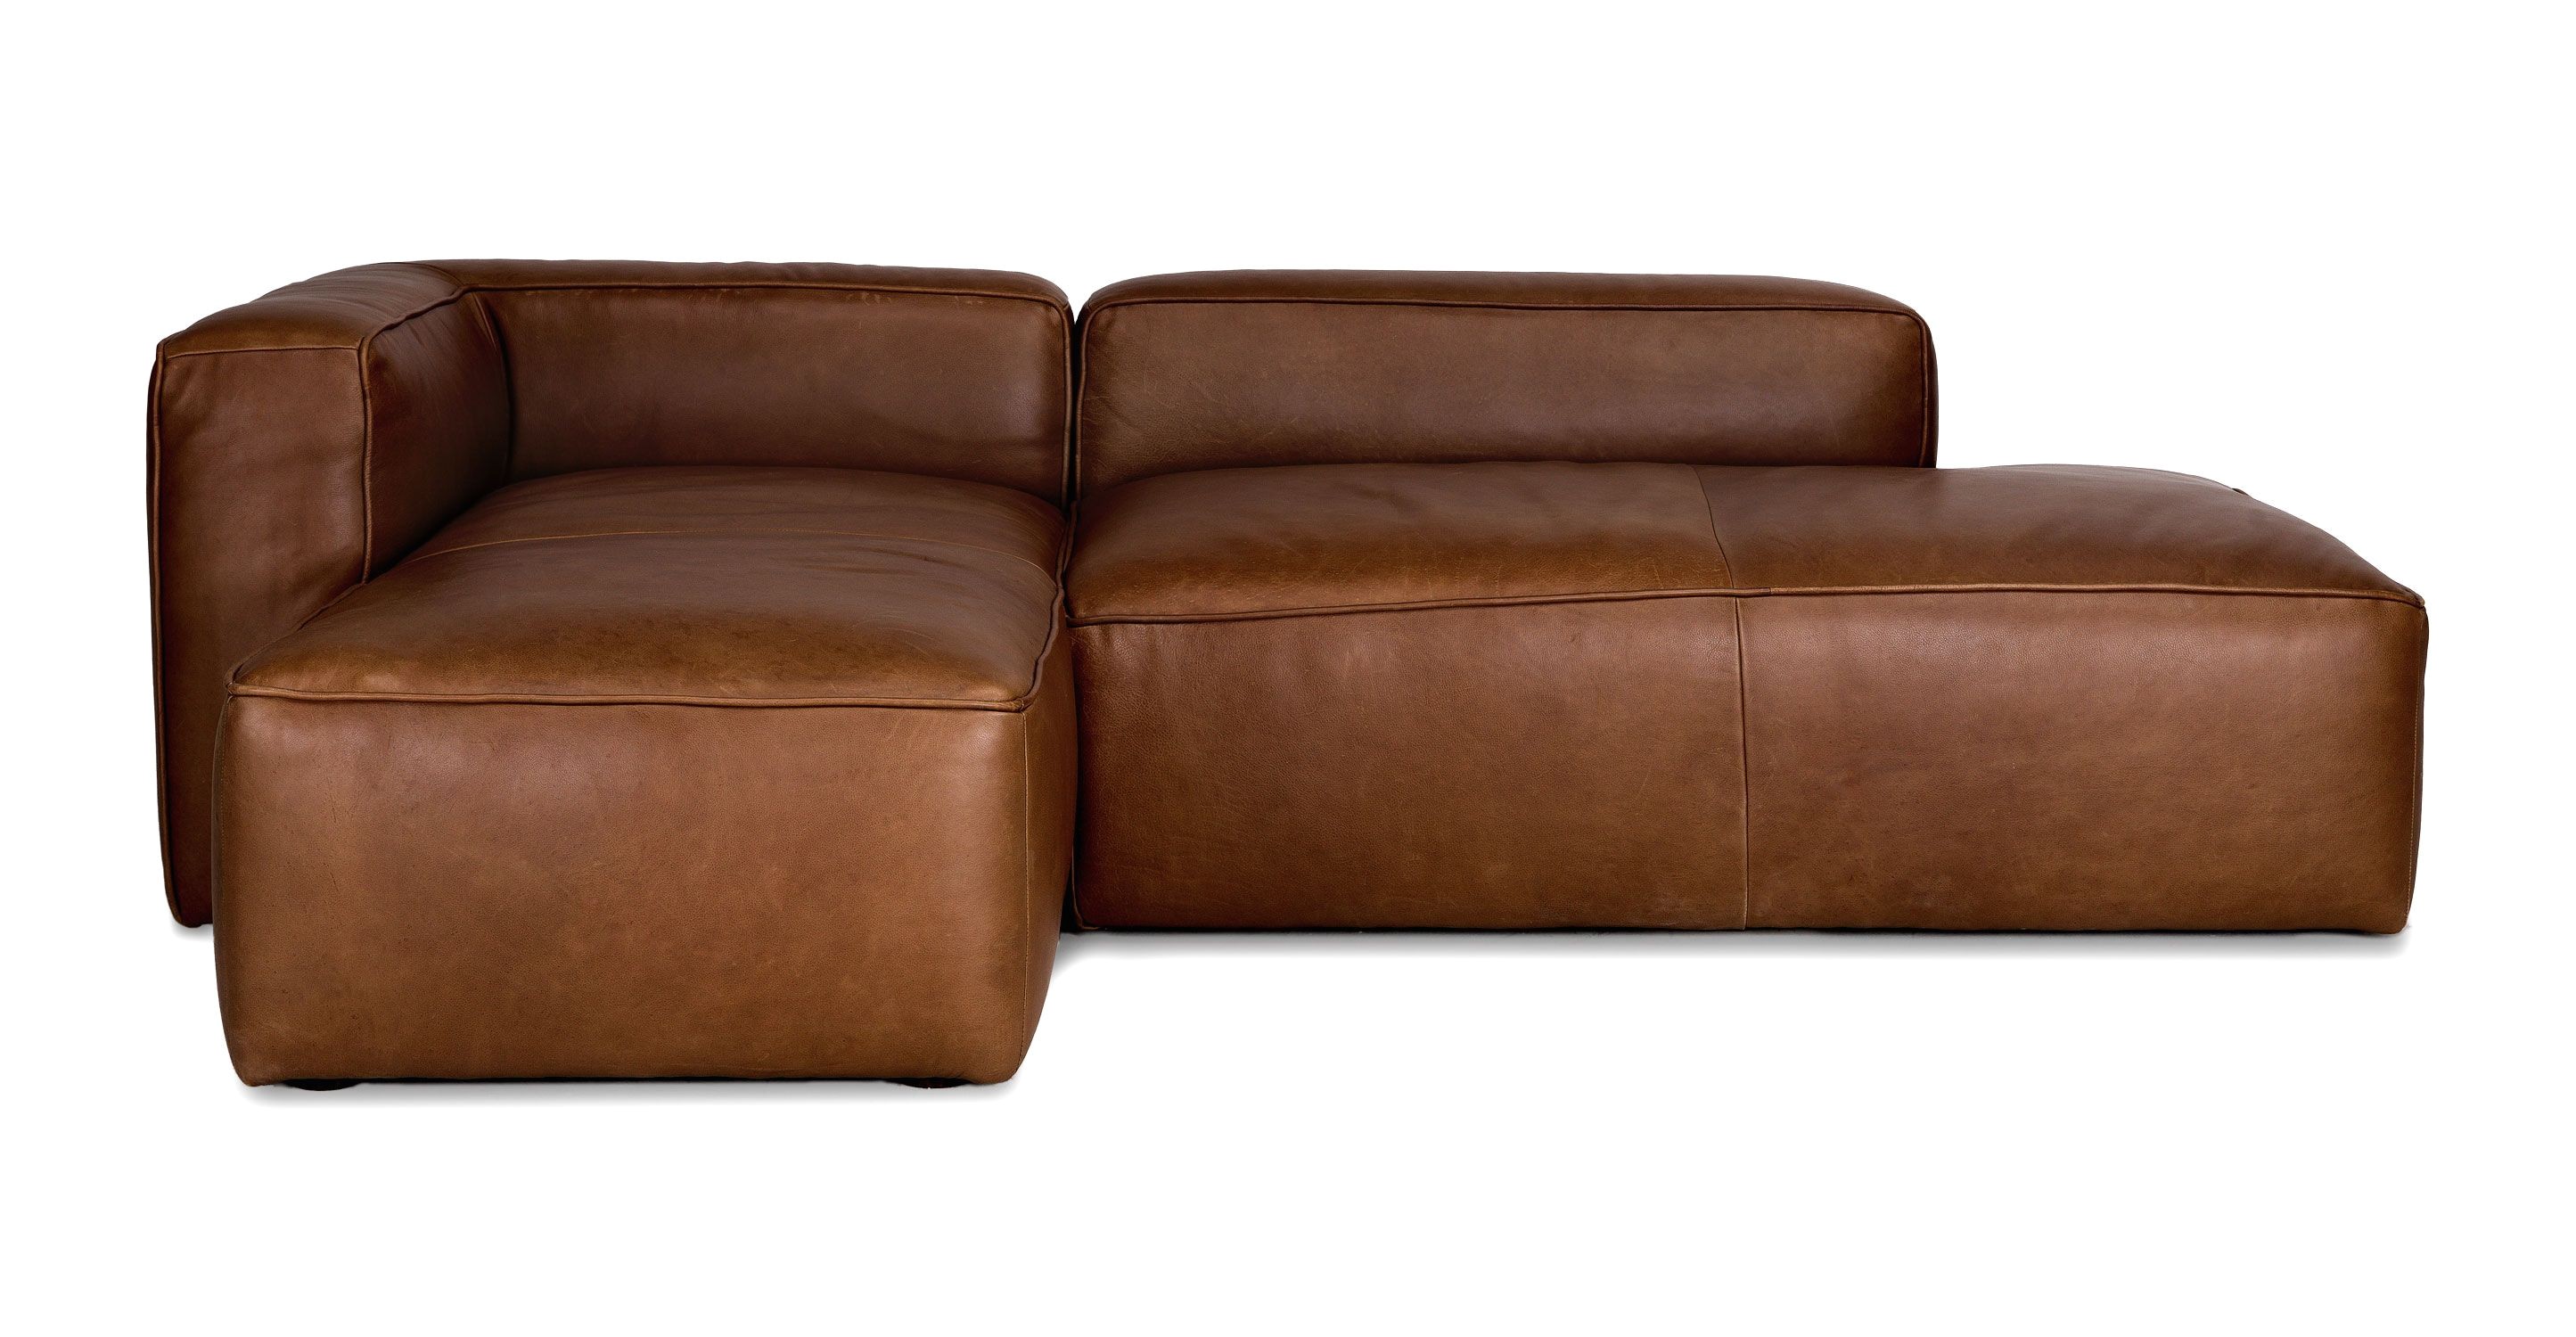 mello taos brown left sectional sofas article modern mid century and scandinavian furniture